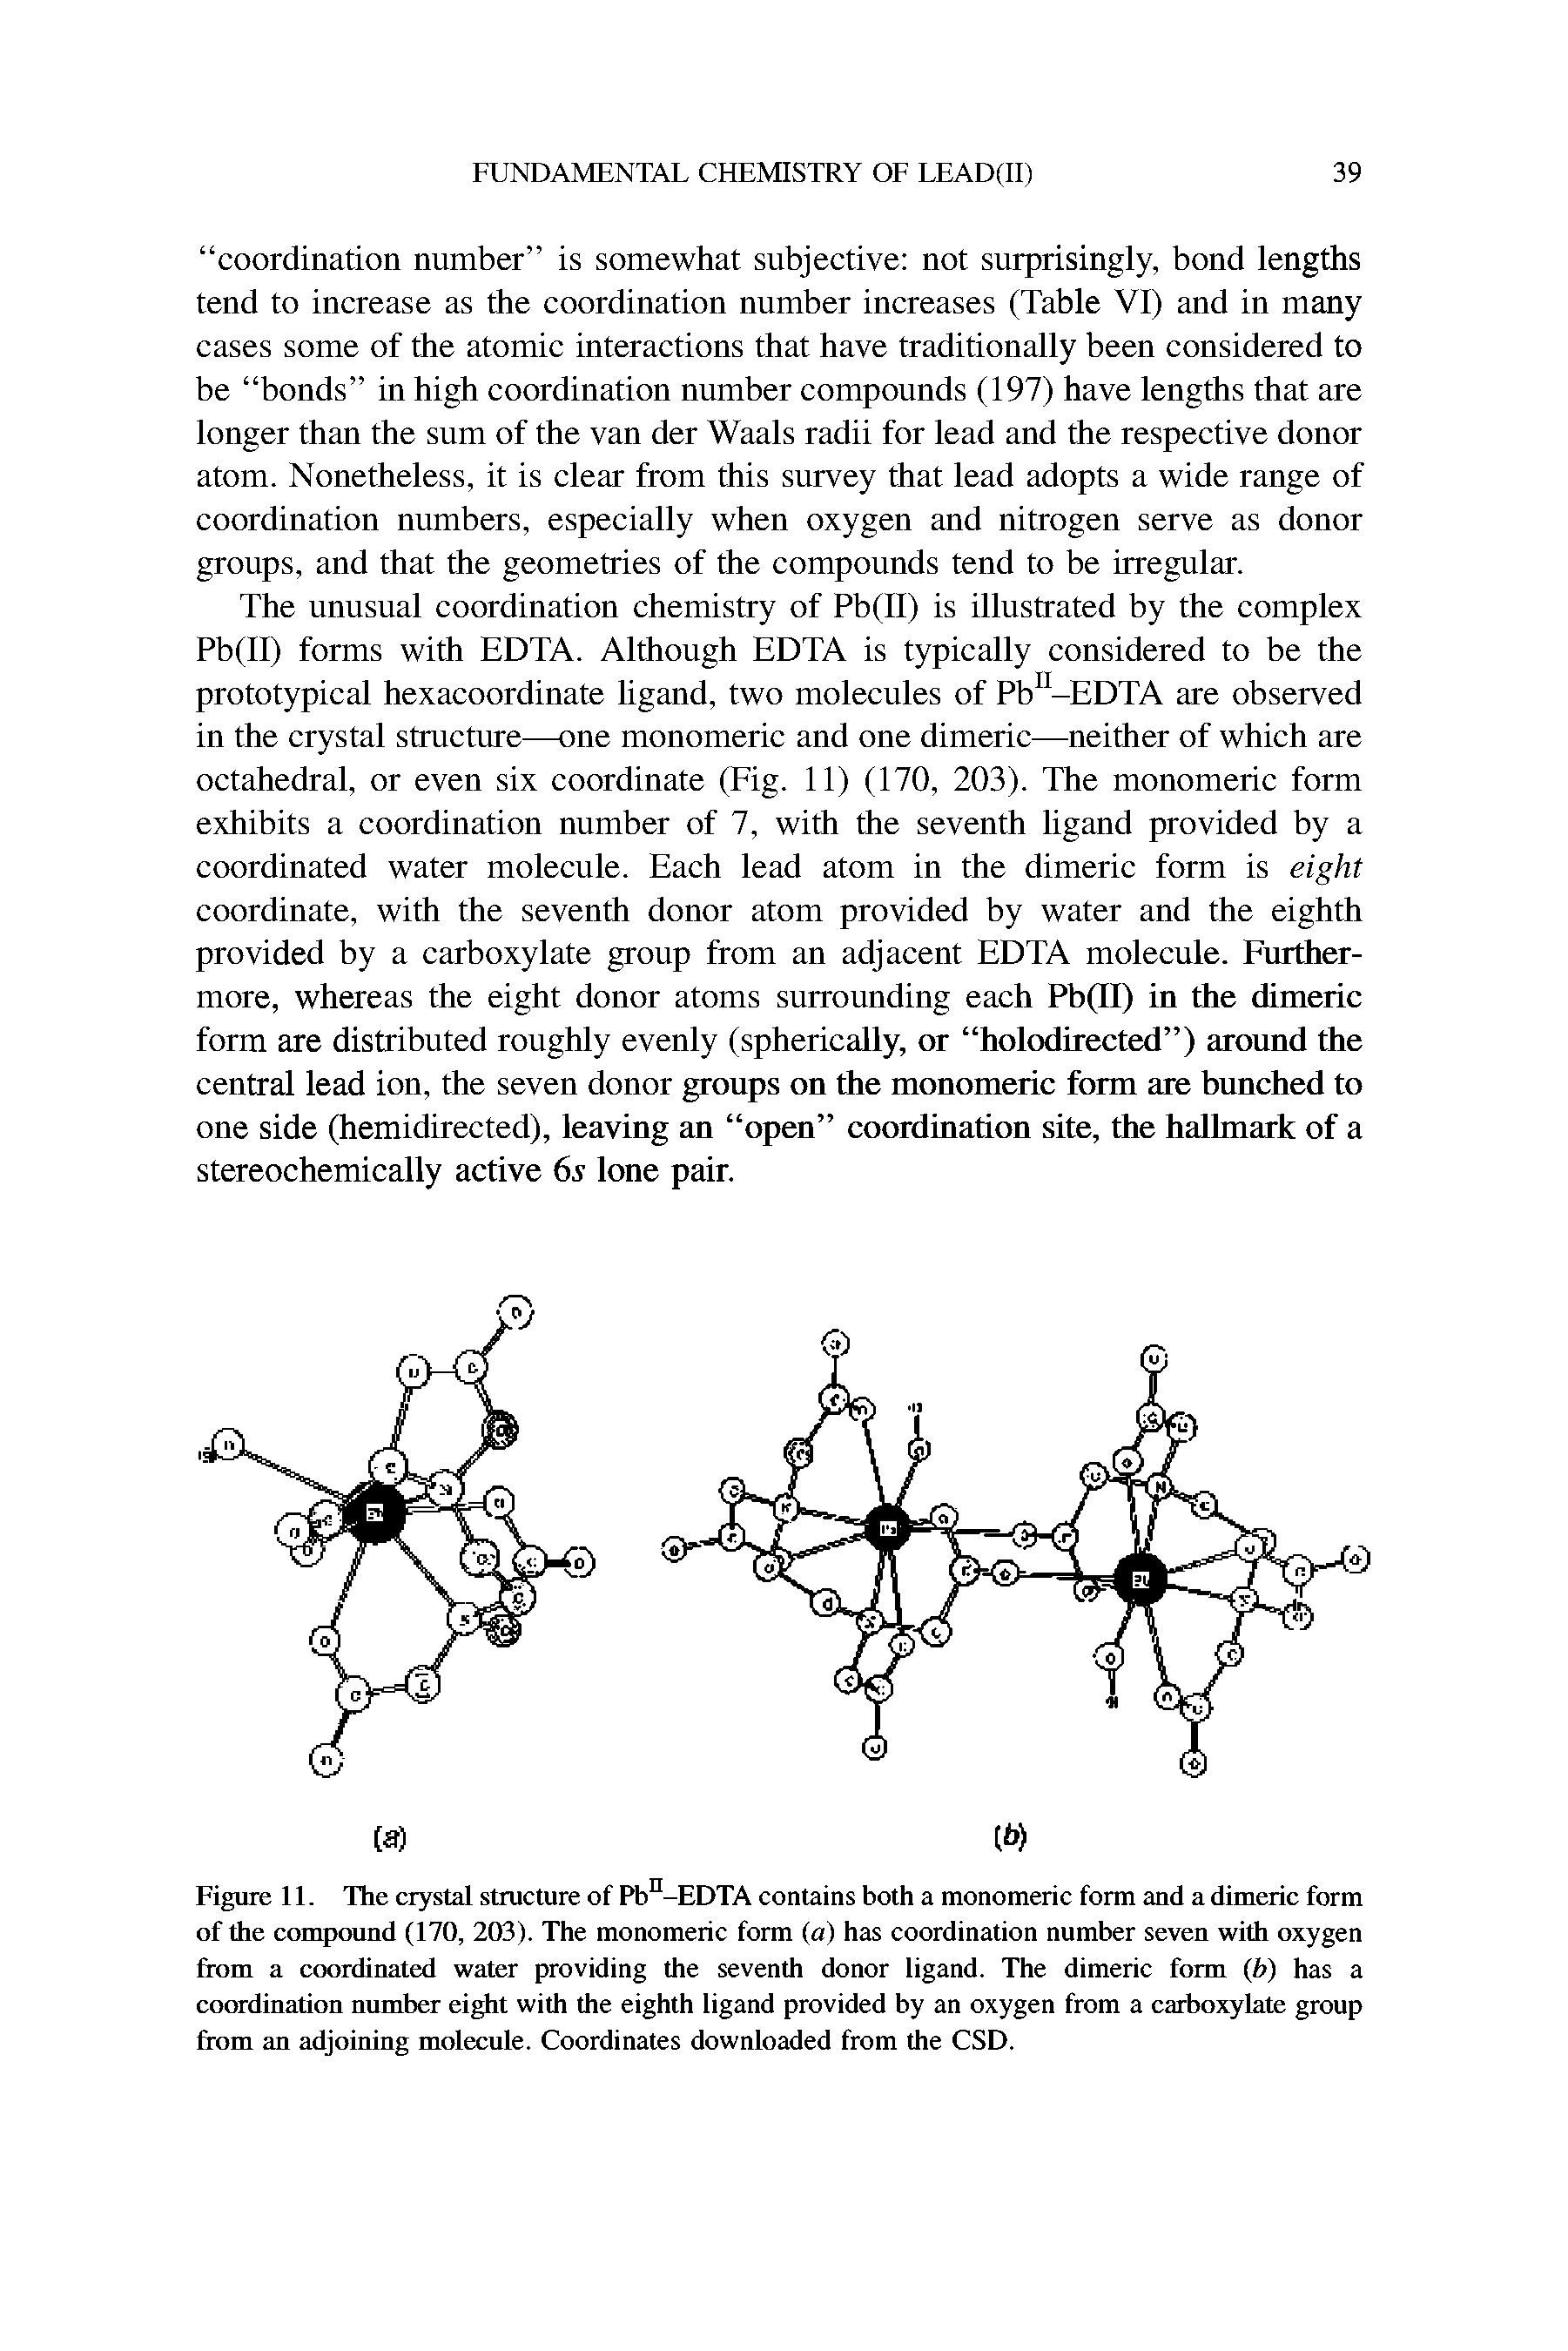 Figure 11. The crystal structure of Pb°-EDTA contains both a monomeric form and a dimeric form of the compound (170, 203). The monomeric form (a) has coordination number seven with oxygen from a coordinated water providing the seventh donor ligand. The dimeric form (h) has a coordination number eight with the eighth ligand provided by an oxygen from a carboxylate group from an adjoining molecule. Coordinates downloaded from the CSD.